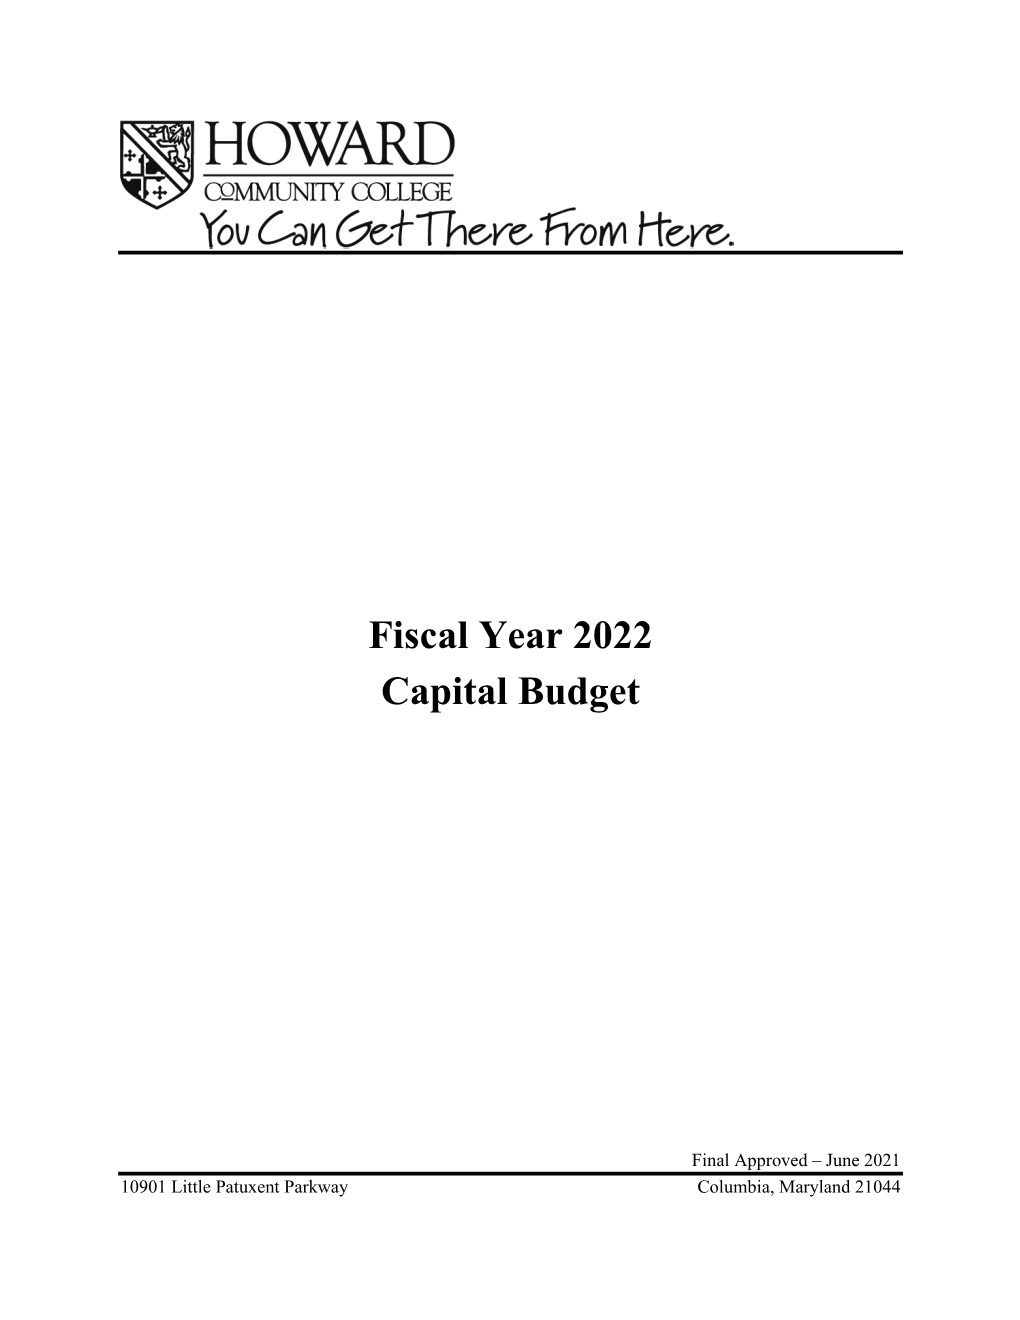 Fiscal Year 2022 Capital Budget